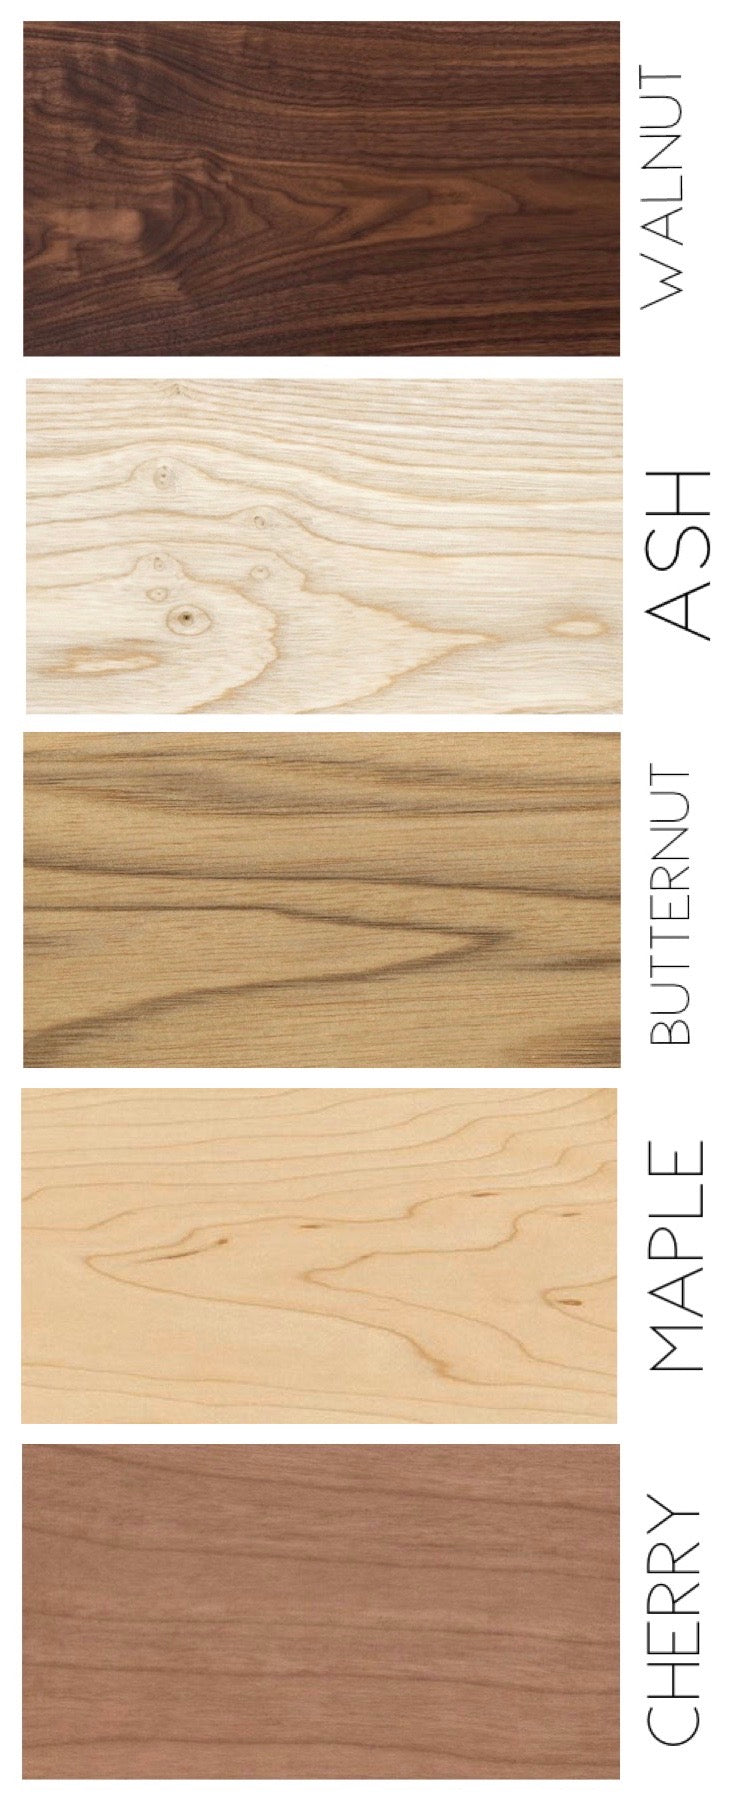 A guide for the various options of wood shades for the Castle Joint coffee table